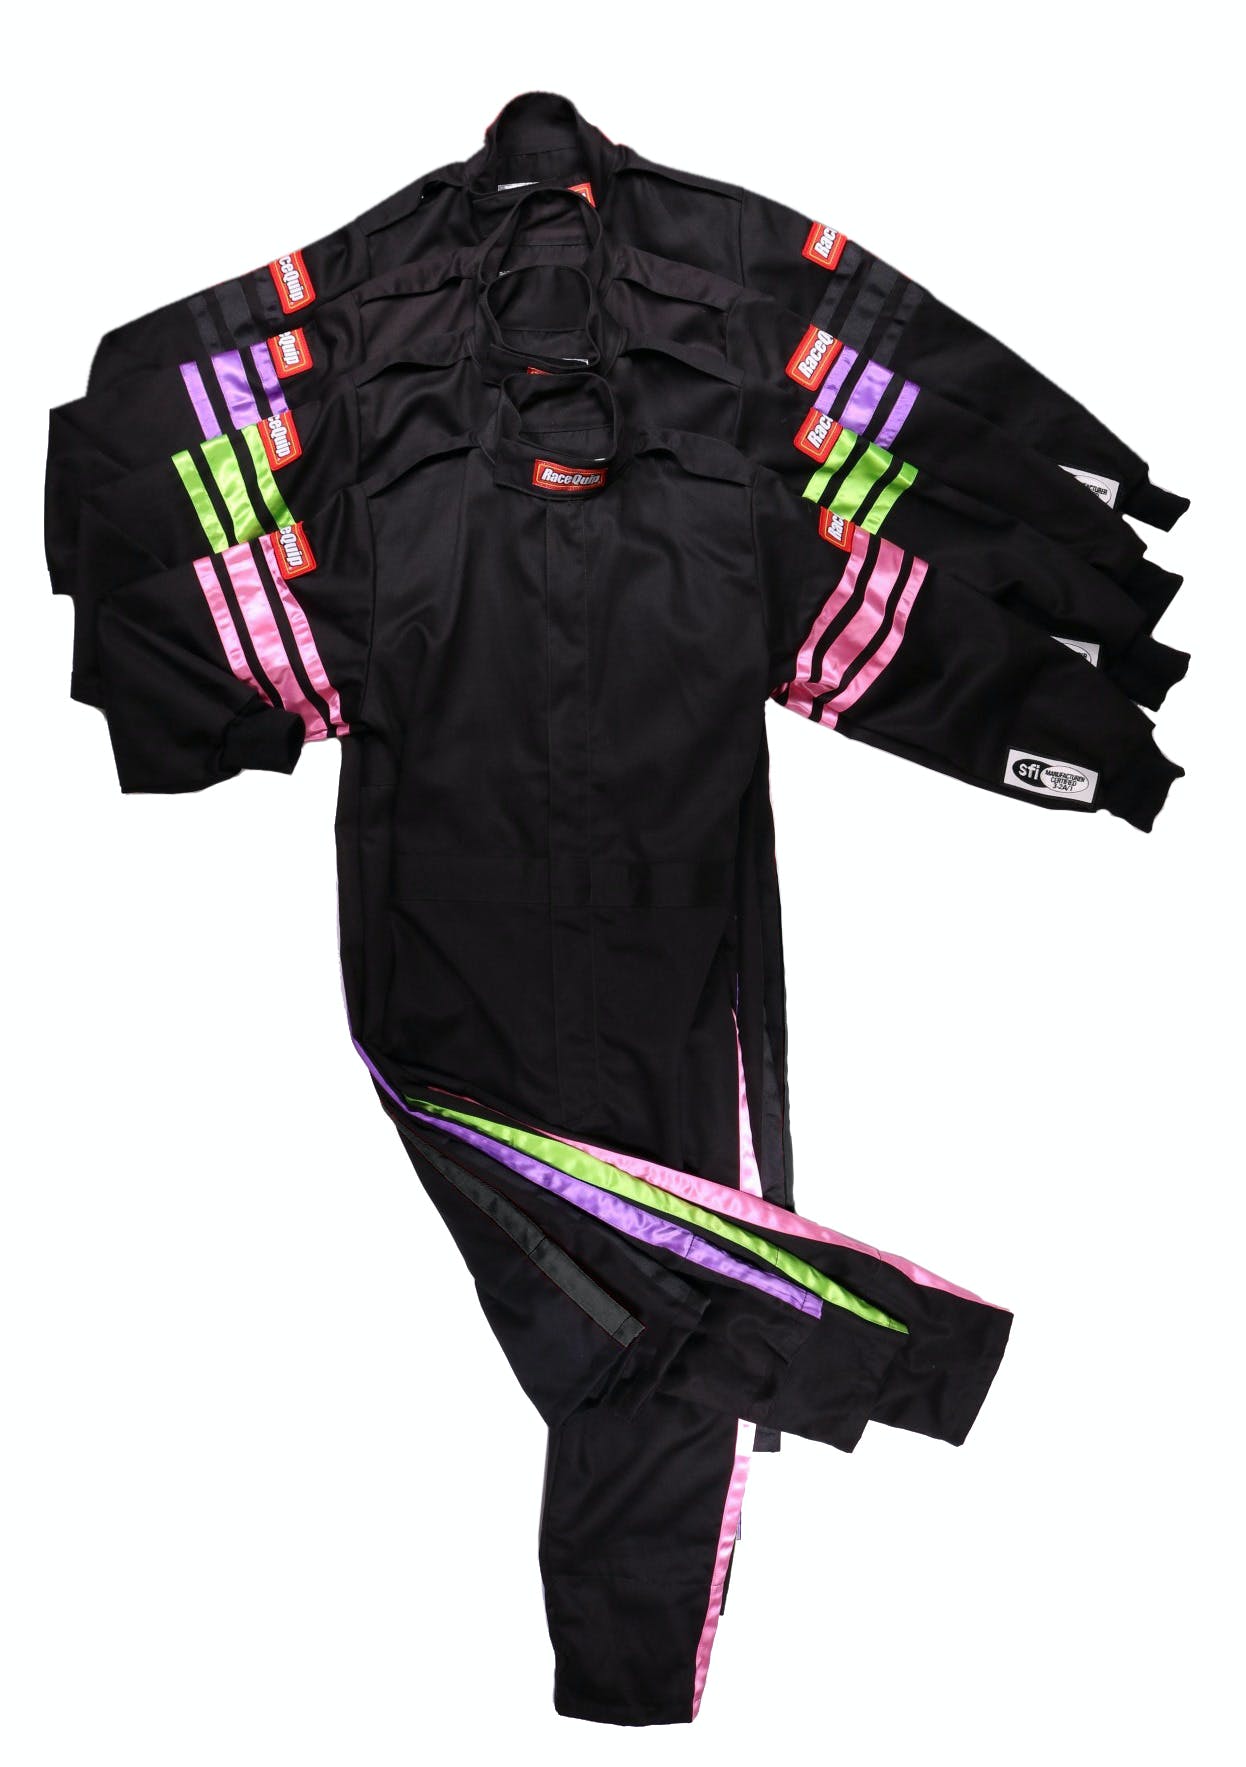 RaceQuip 1950593 SFI-1 Pyrovatex One-Piece Single-Layer Youth Racing Fire Suit (Black/Purple-M)